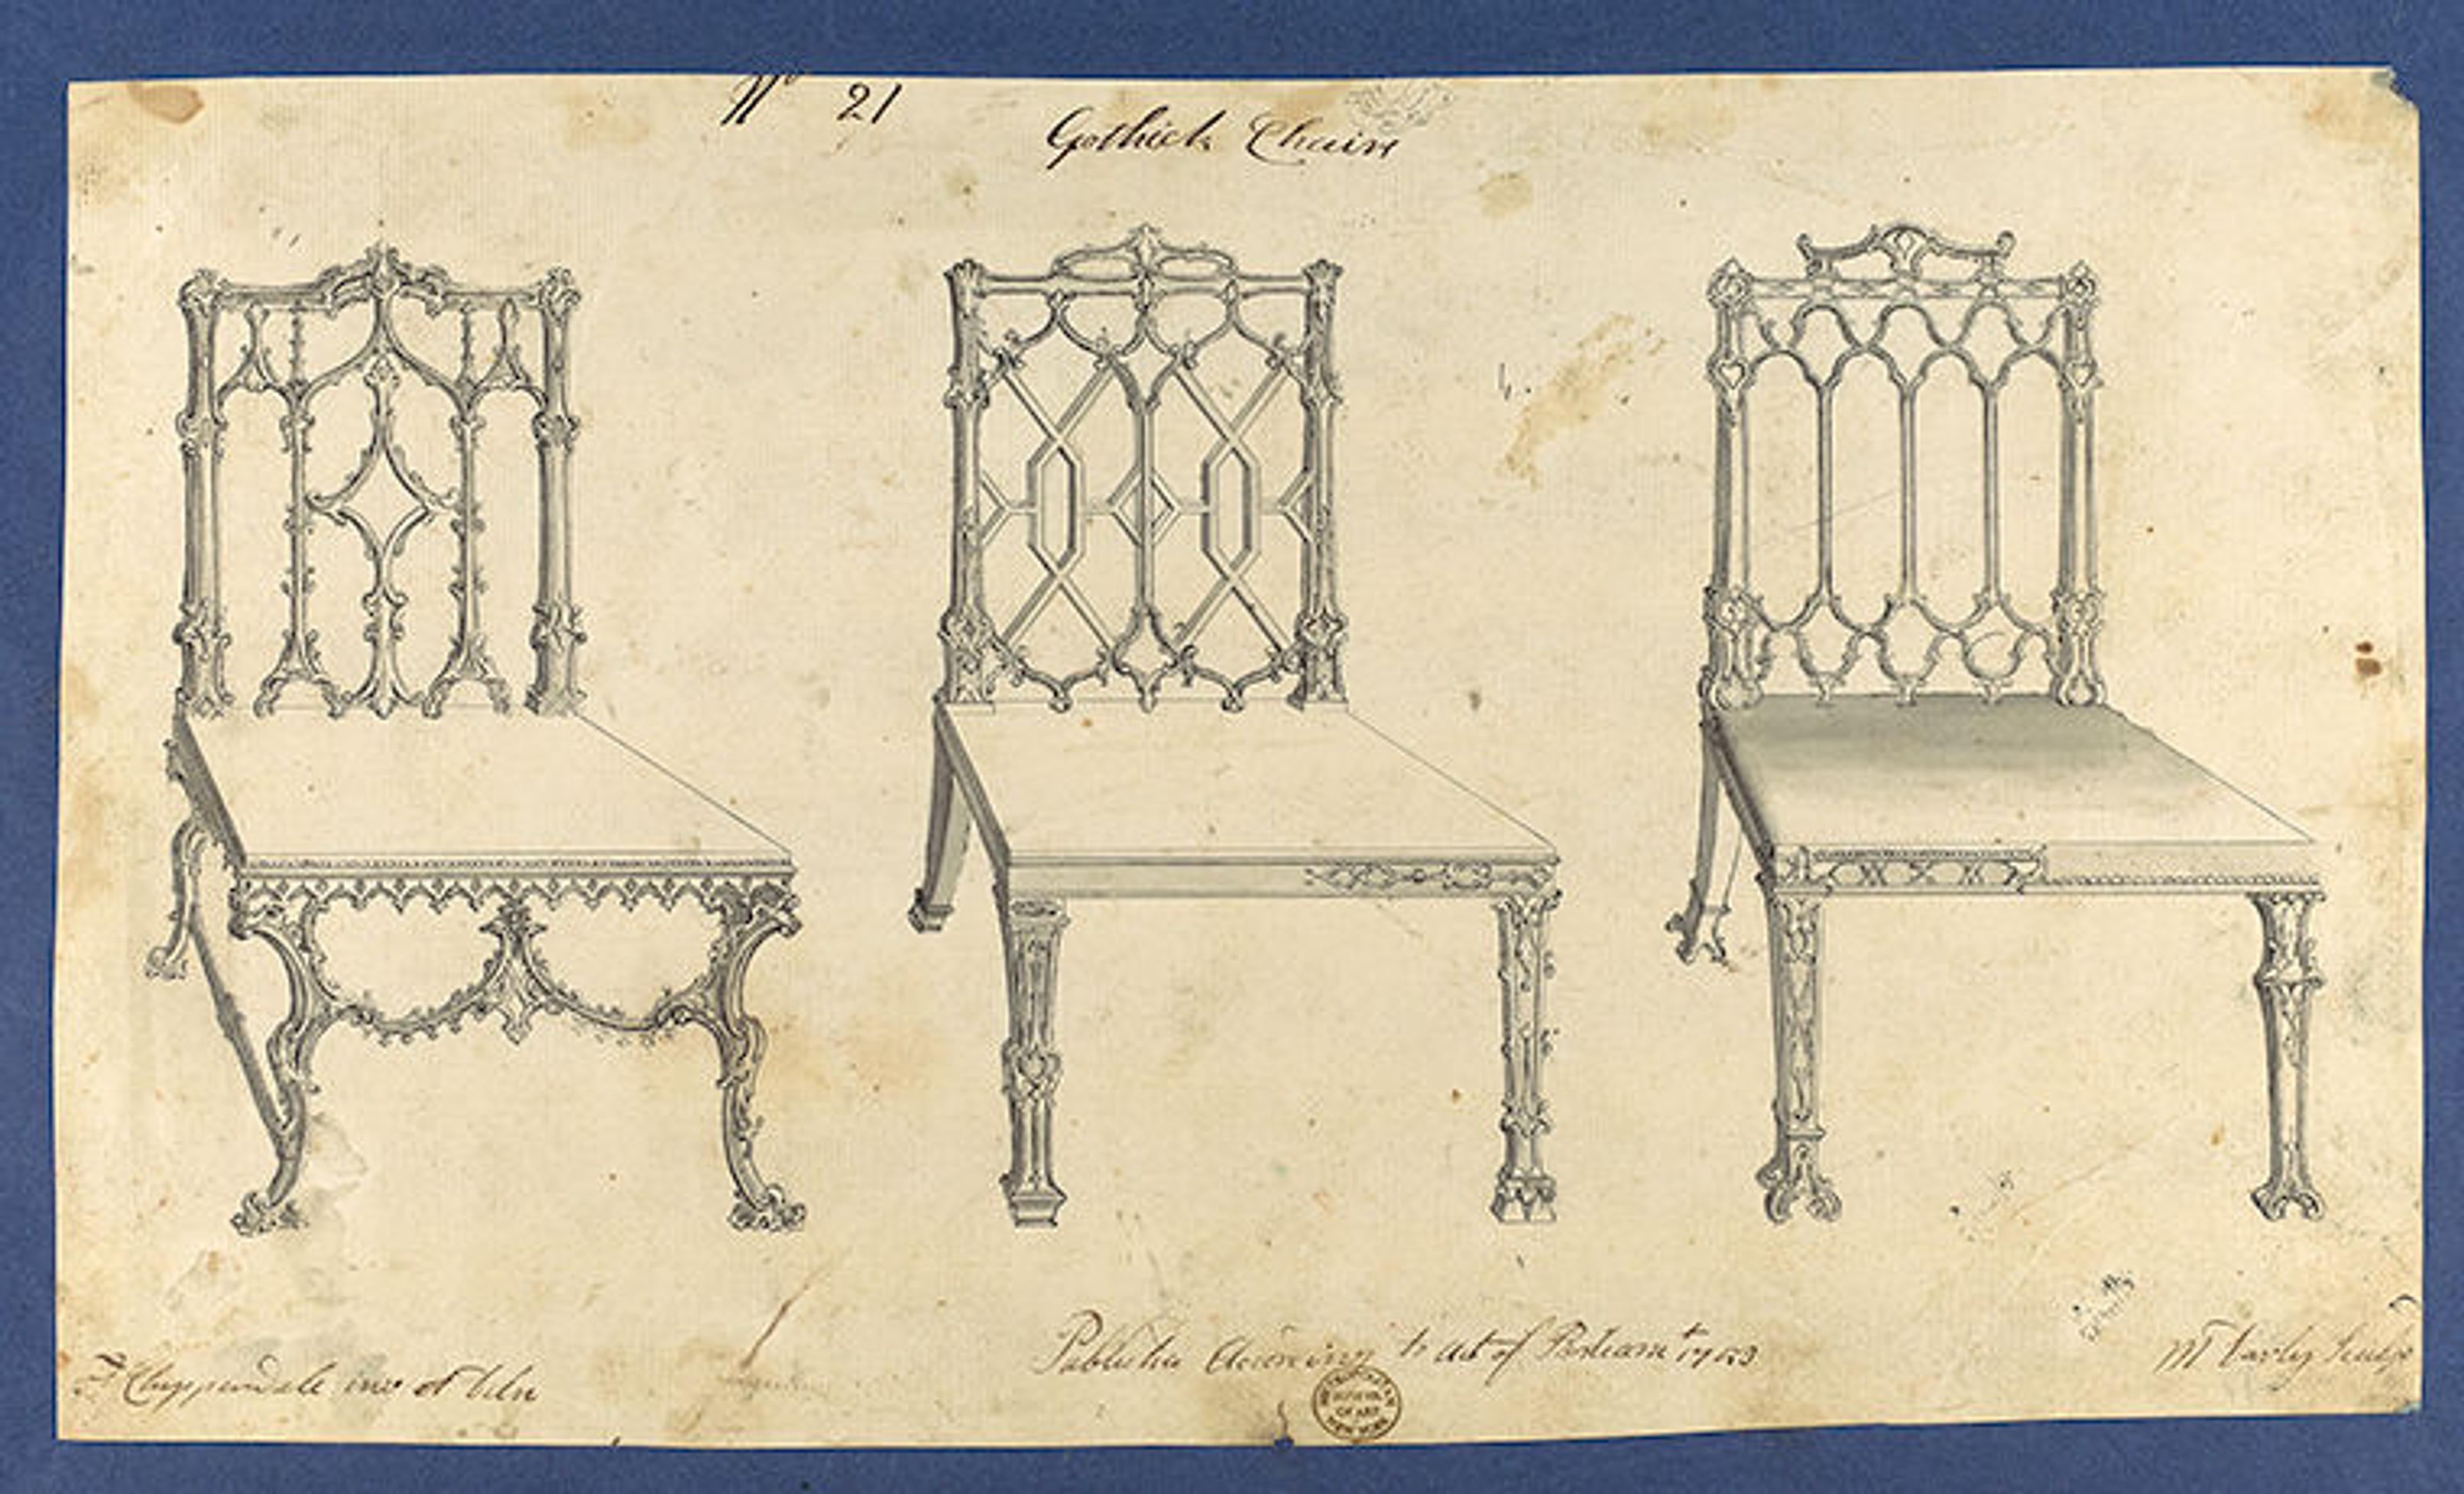 Thomas Chippendale's design for Gothic chairs